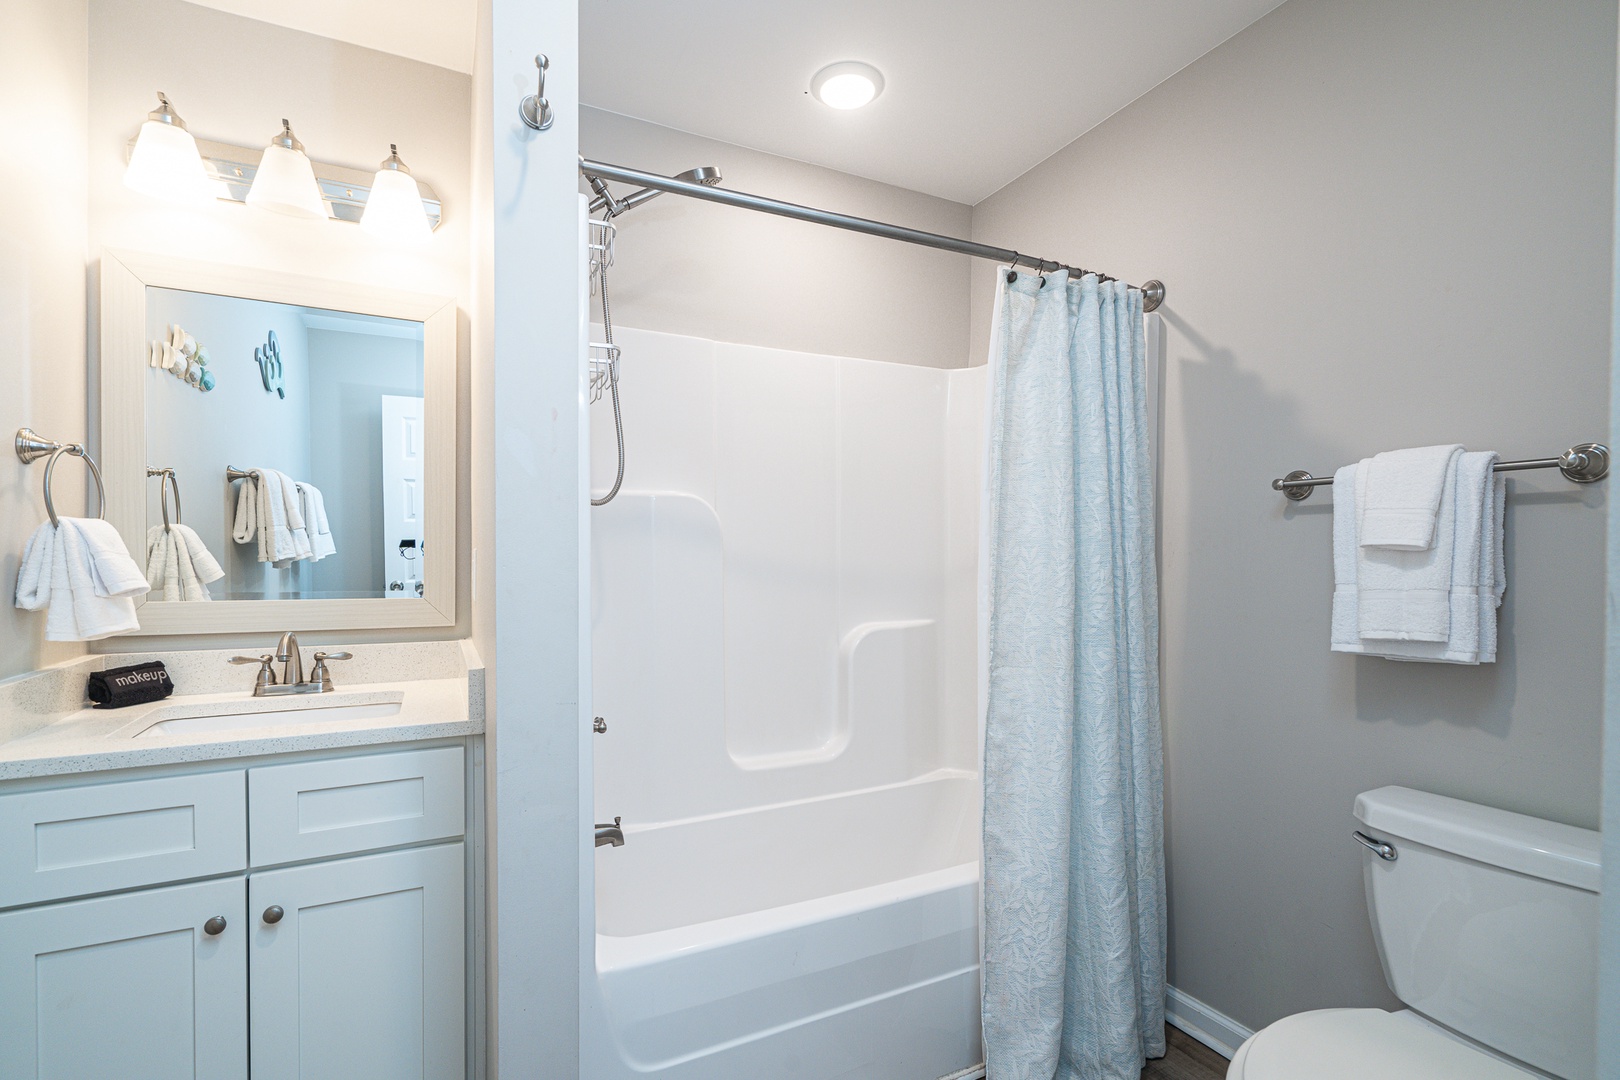 This shared full bathroom offers a single vanity & shower/tub combo